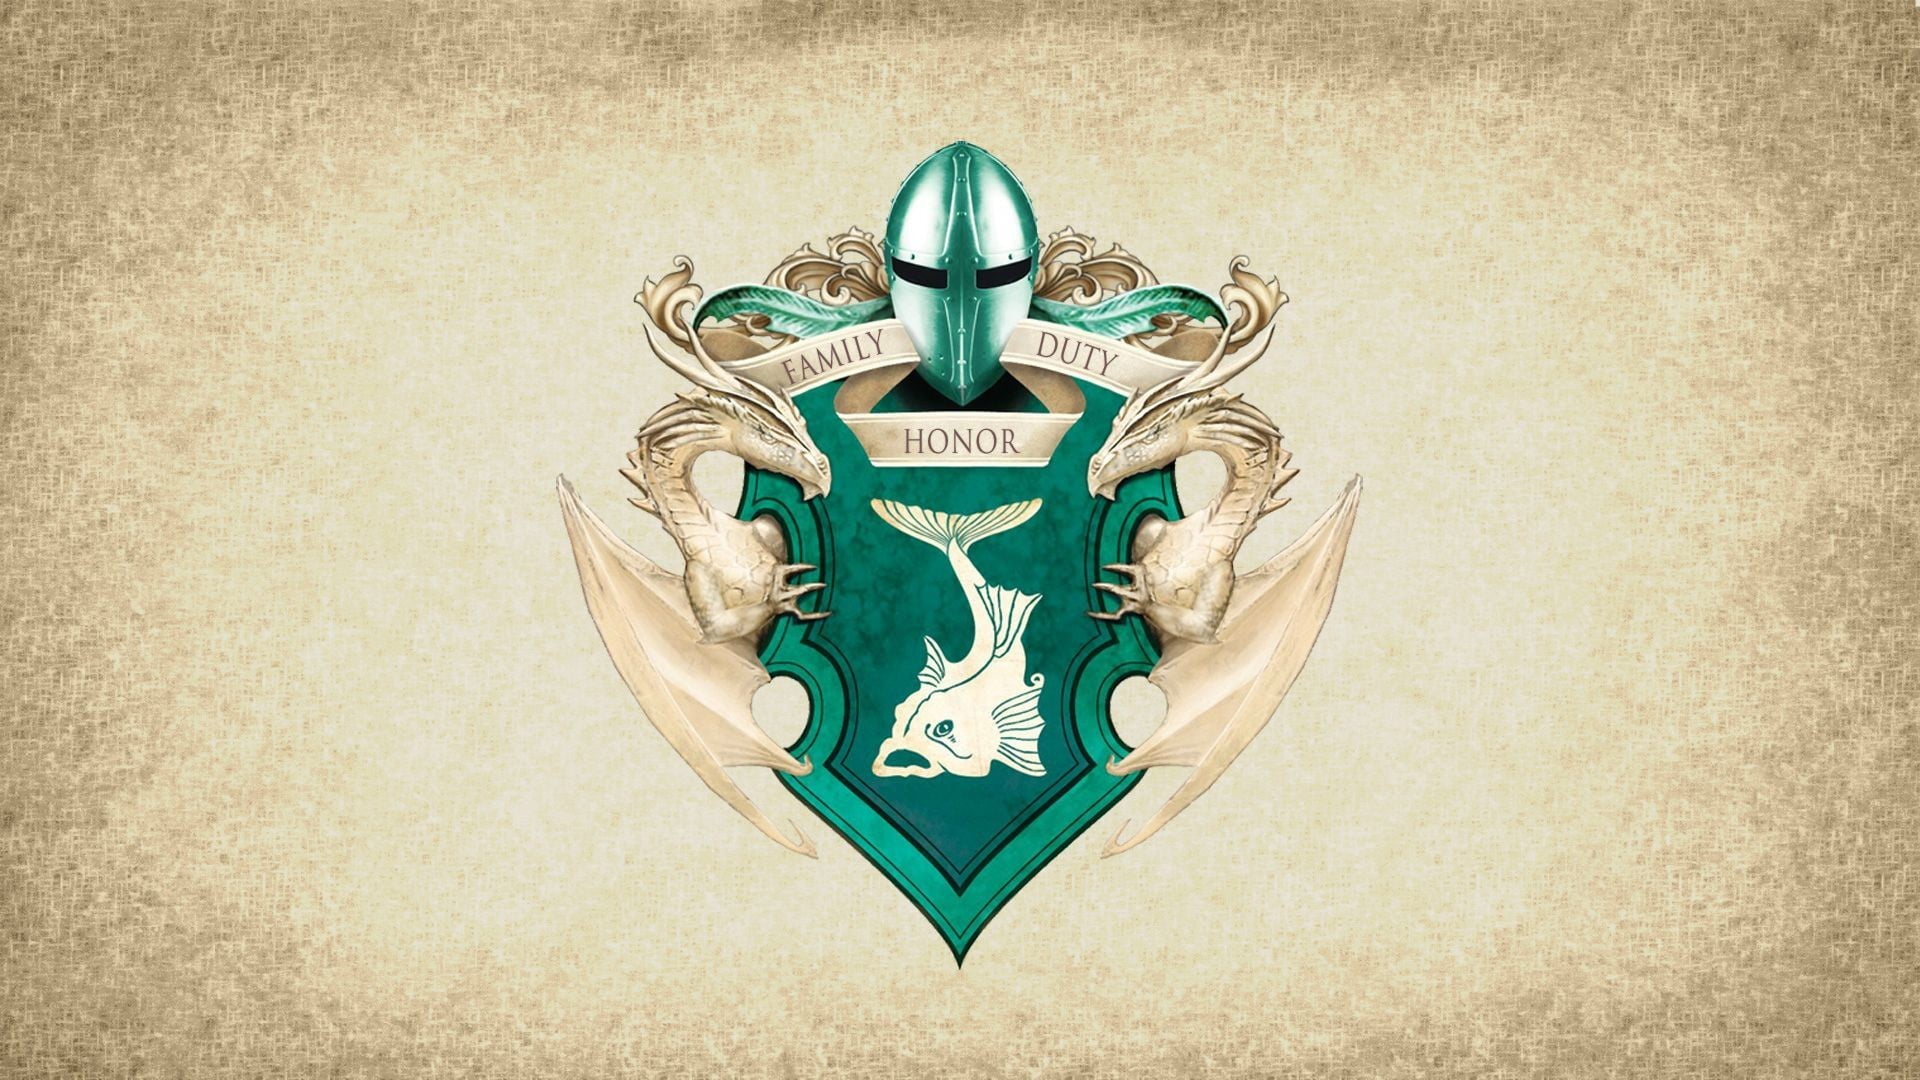 green and gray Family Duty Honor logo, Game of Thrones, artwork, paper, coats of arms